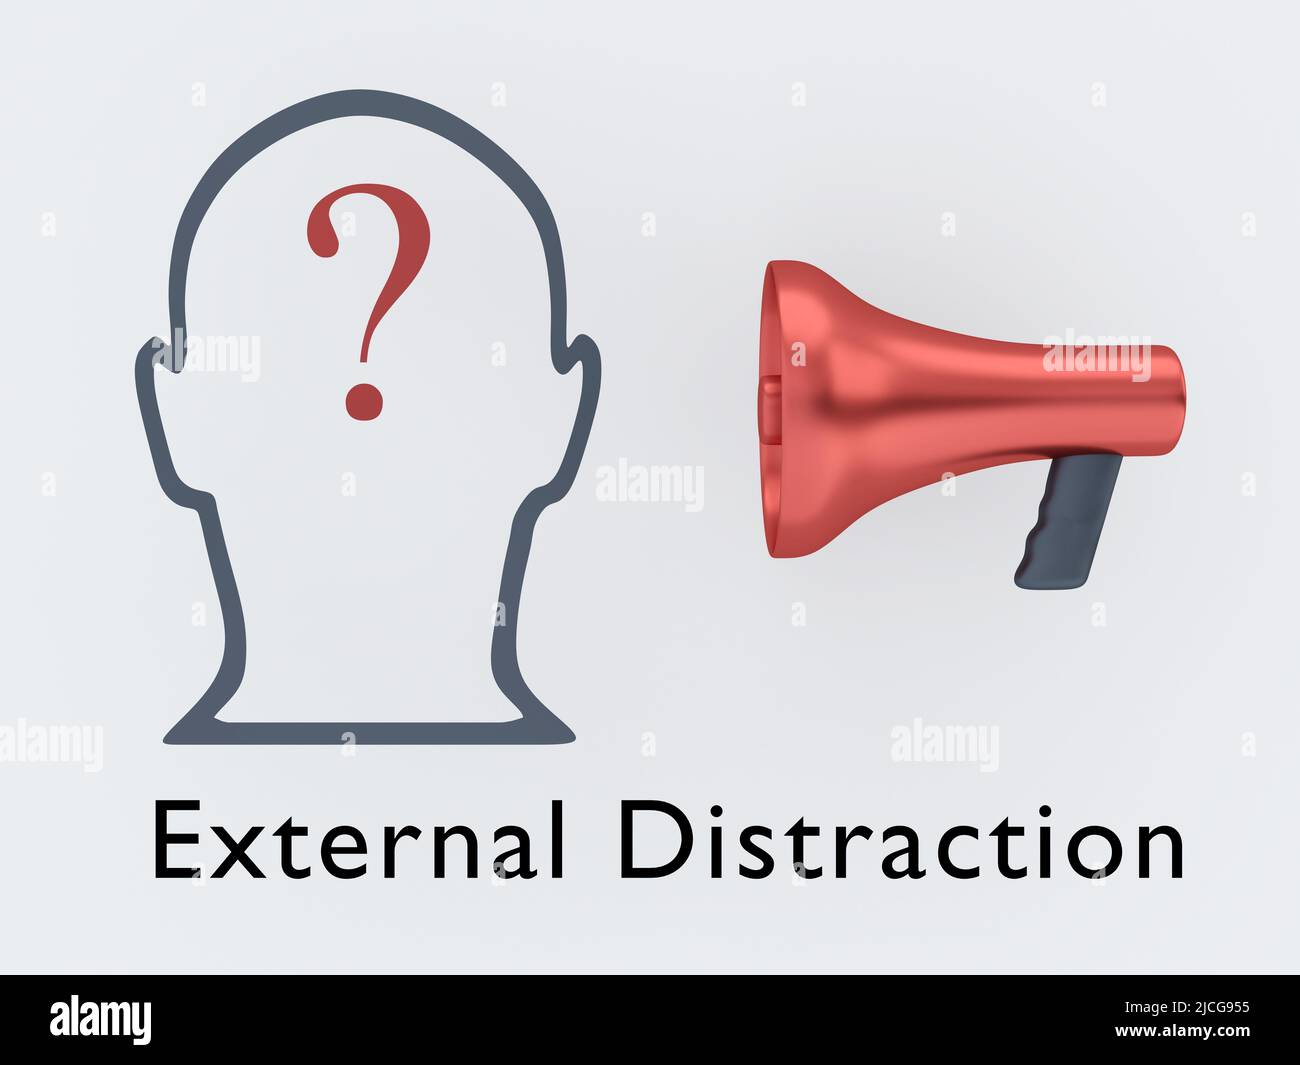 3D illustration of question mark contained in a head silhouette along with a megaphone, over the text External Distraction. Stock Photo